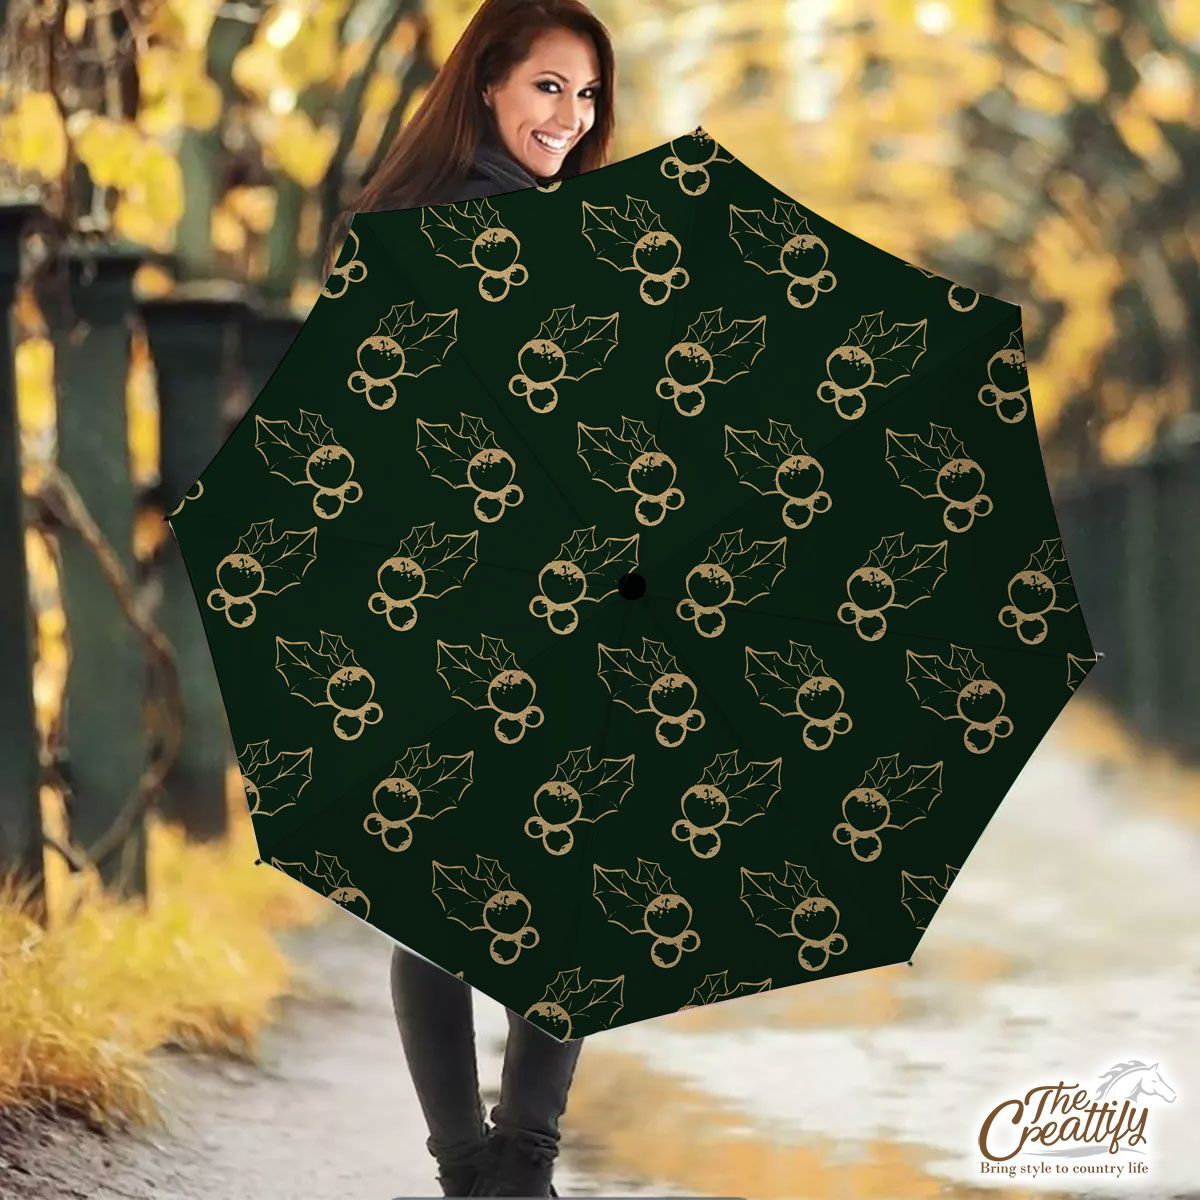 Gold And Green Holly Leaf Umbrella